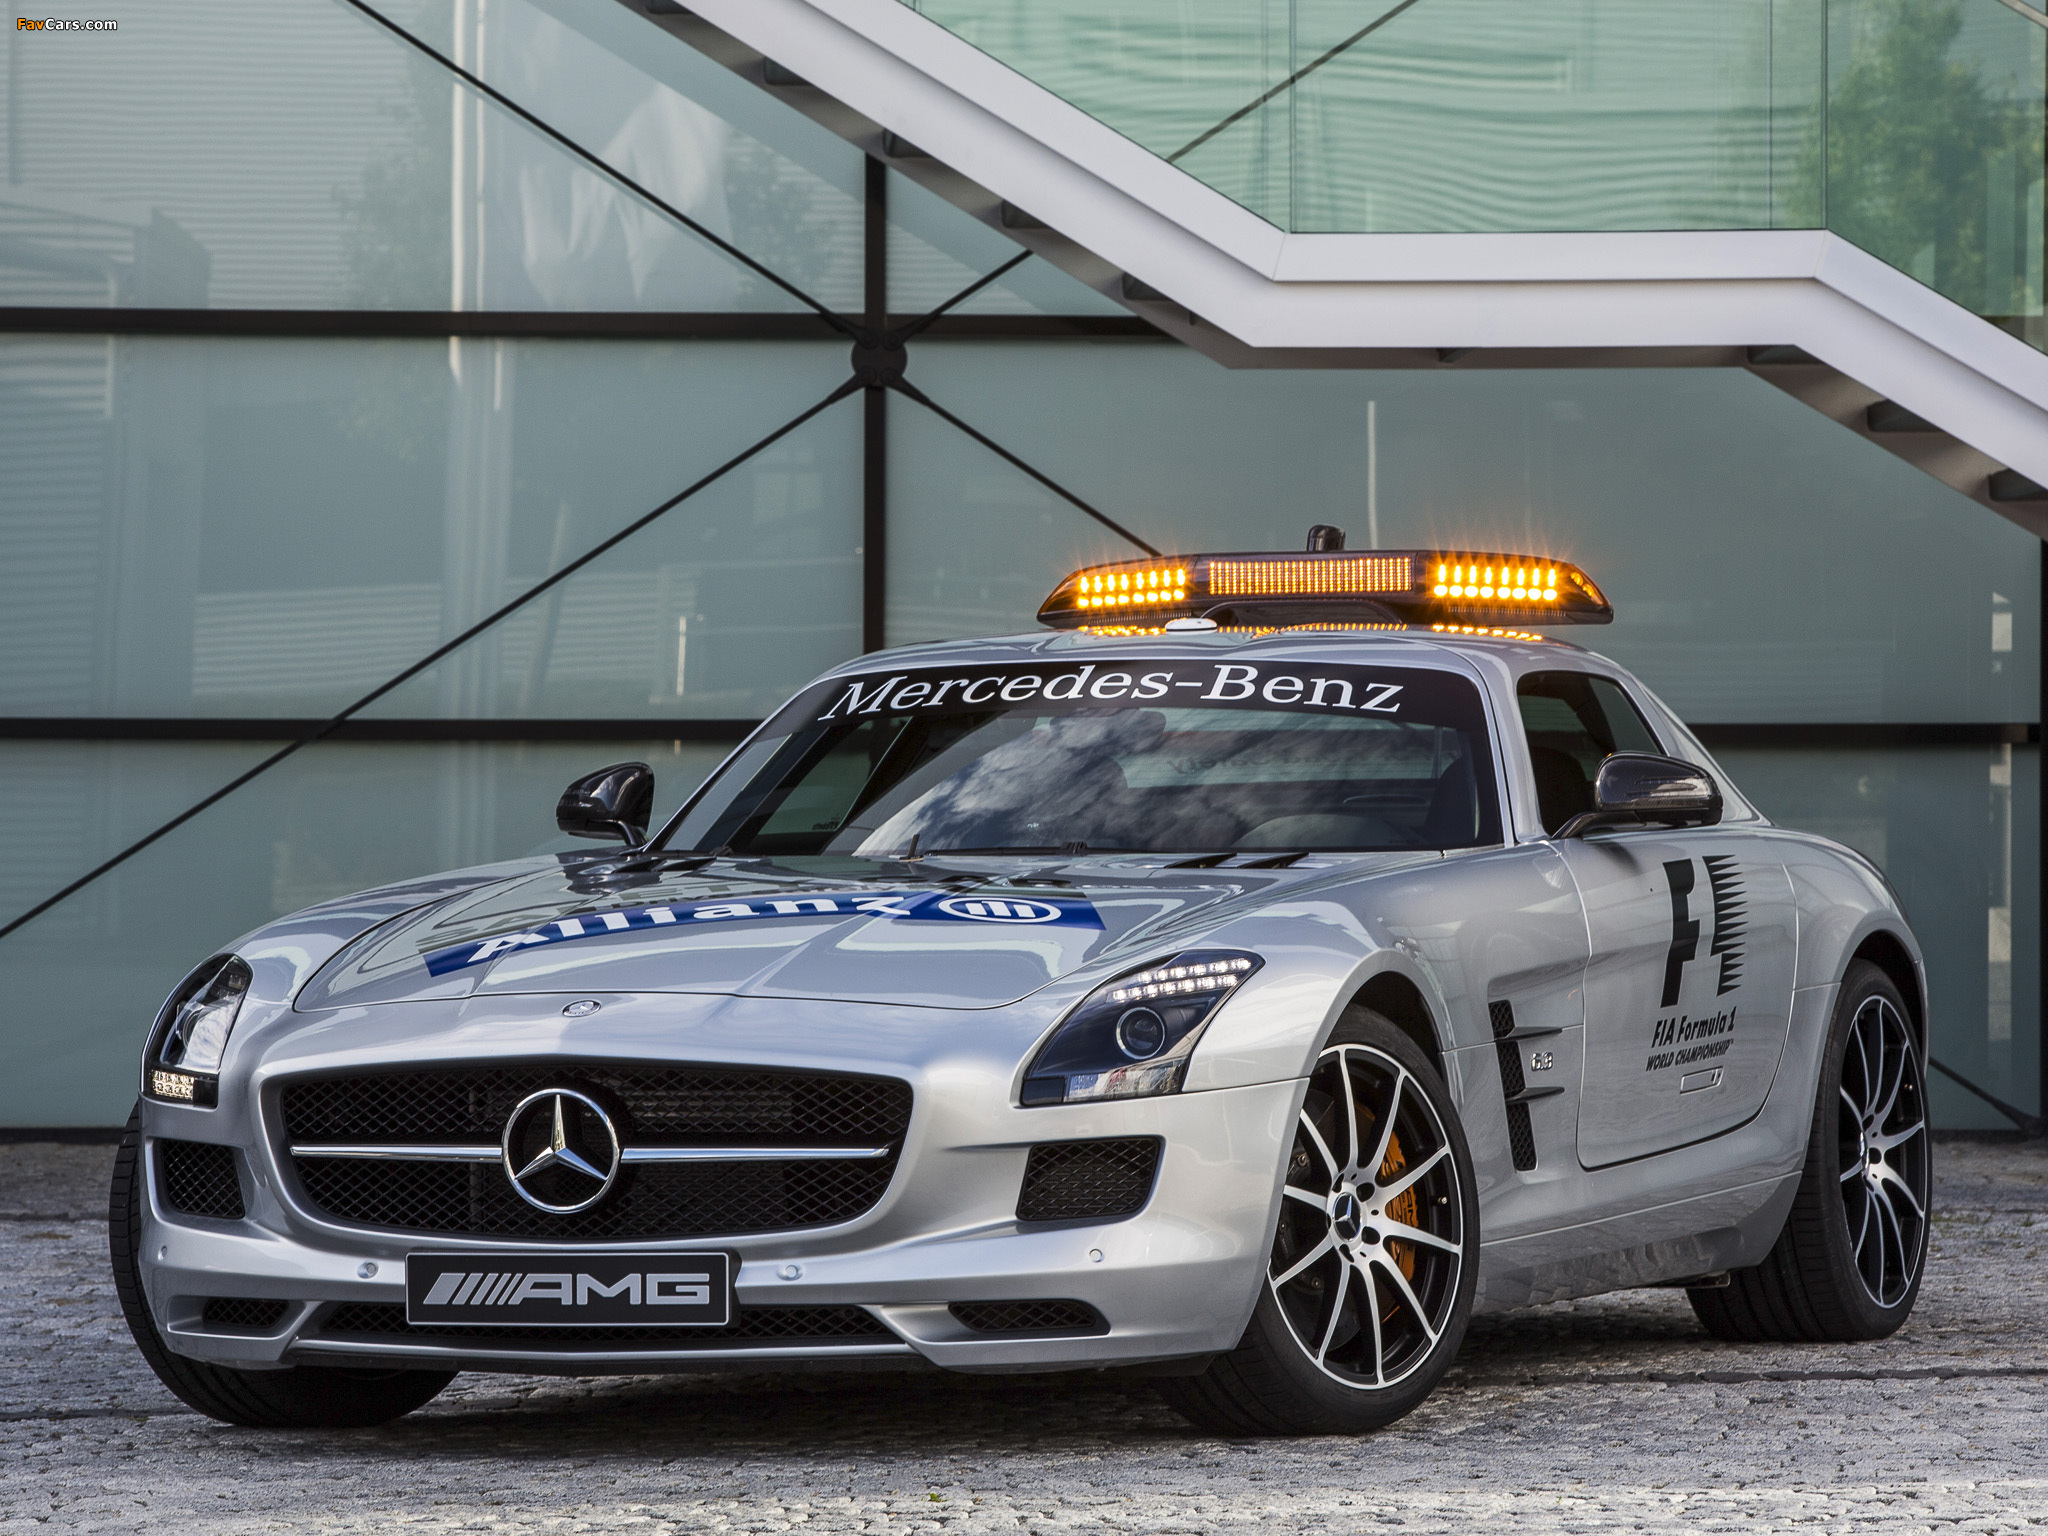 Mercedes-Benz SLS 63 AMG GT F1 Safety Car (C197) 2012 pictures (2048 x 1536)